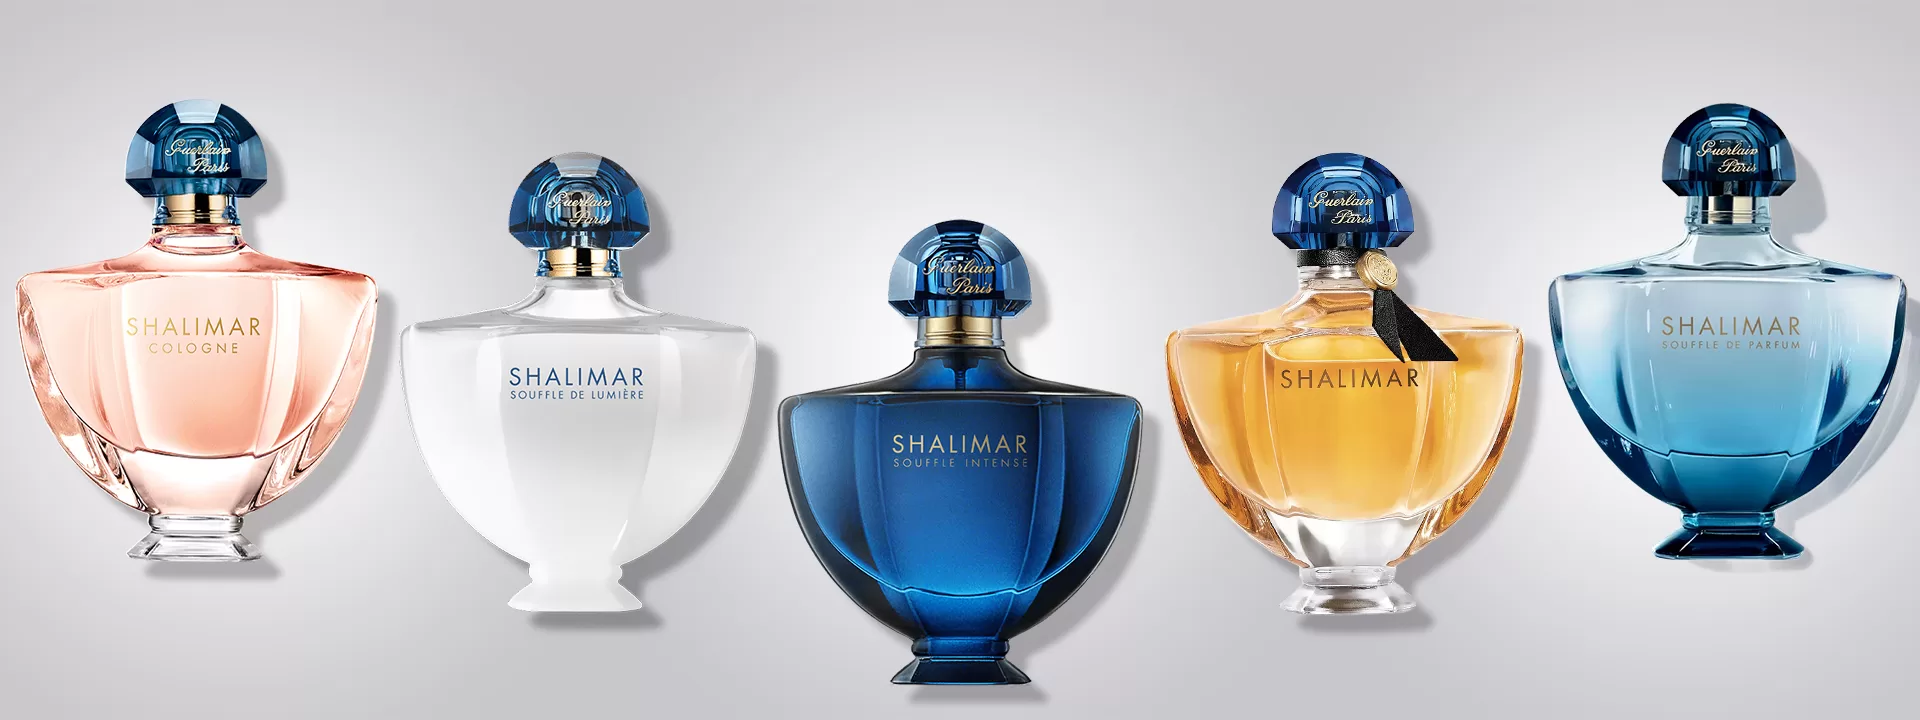 The Ultimate Guide To The Guerlain Shalimar Perfume Range